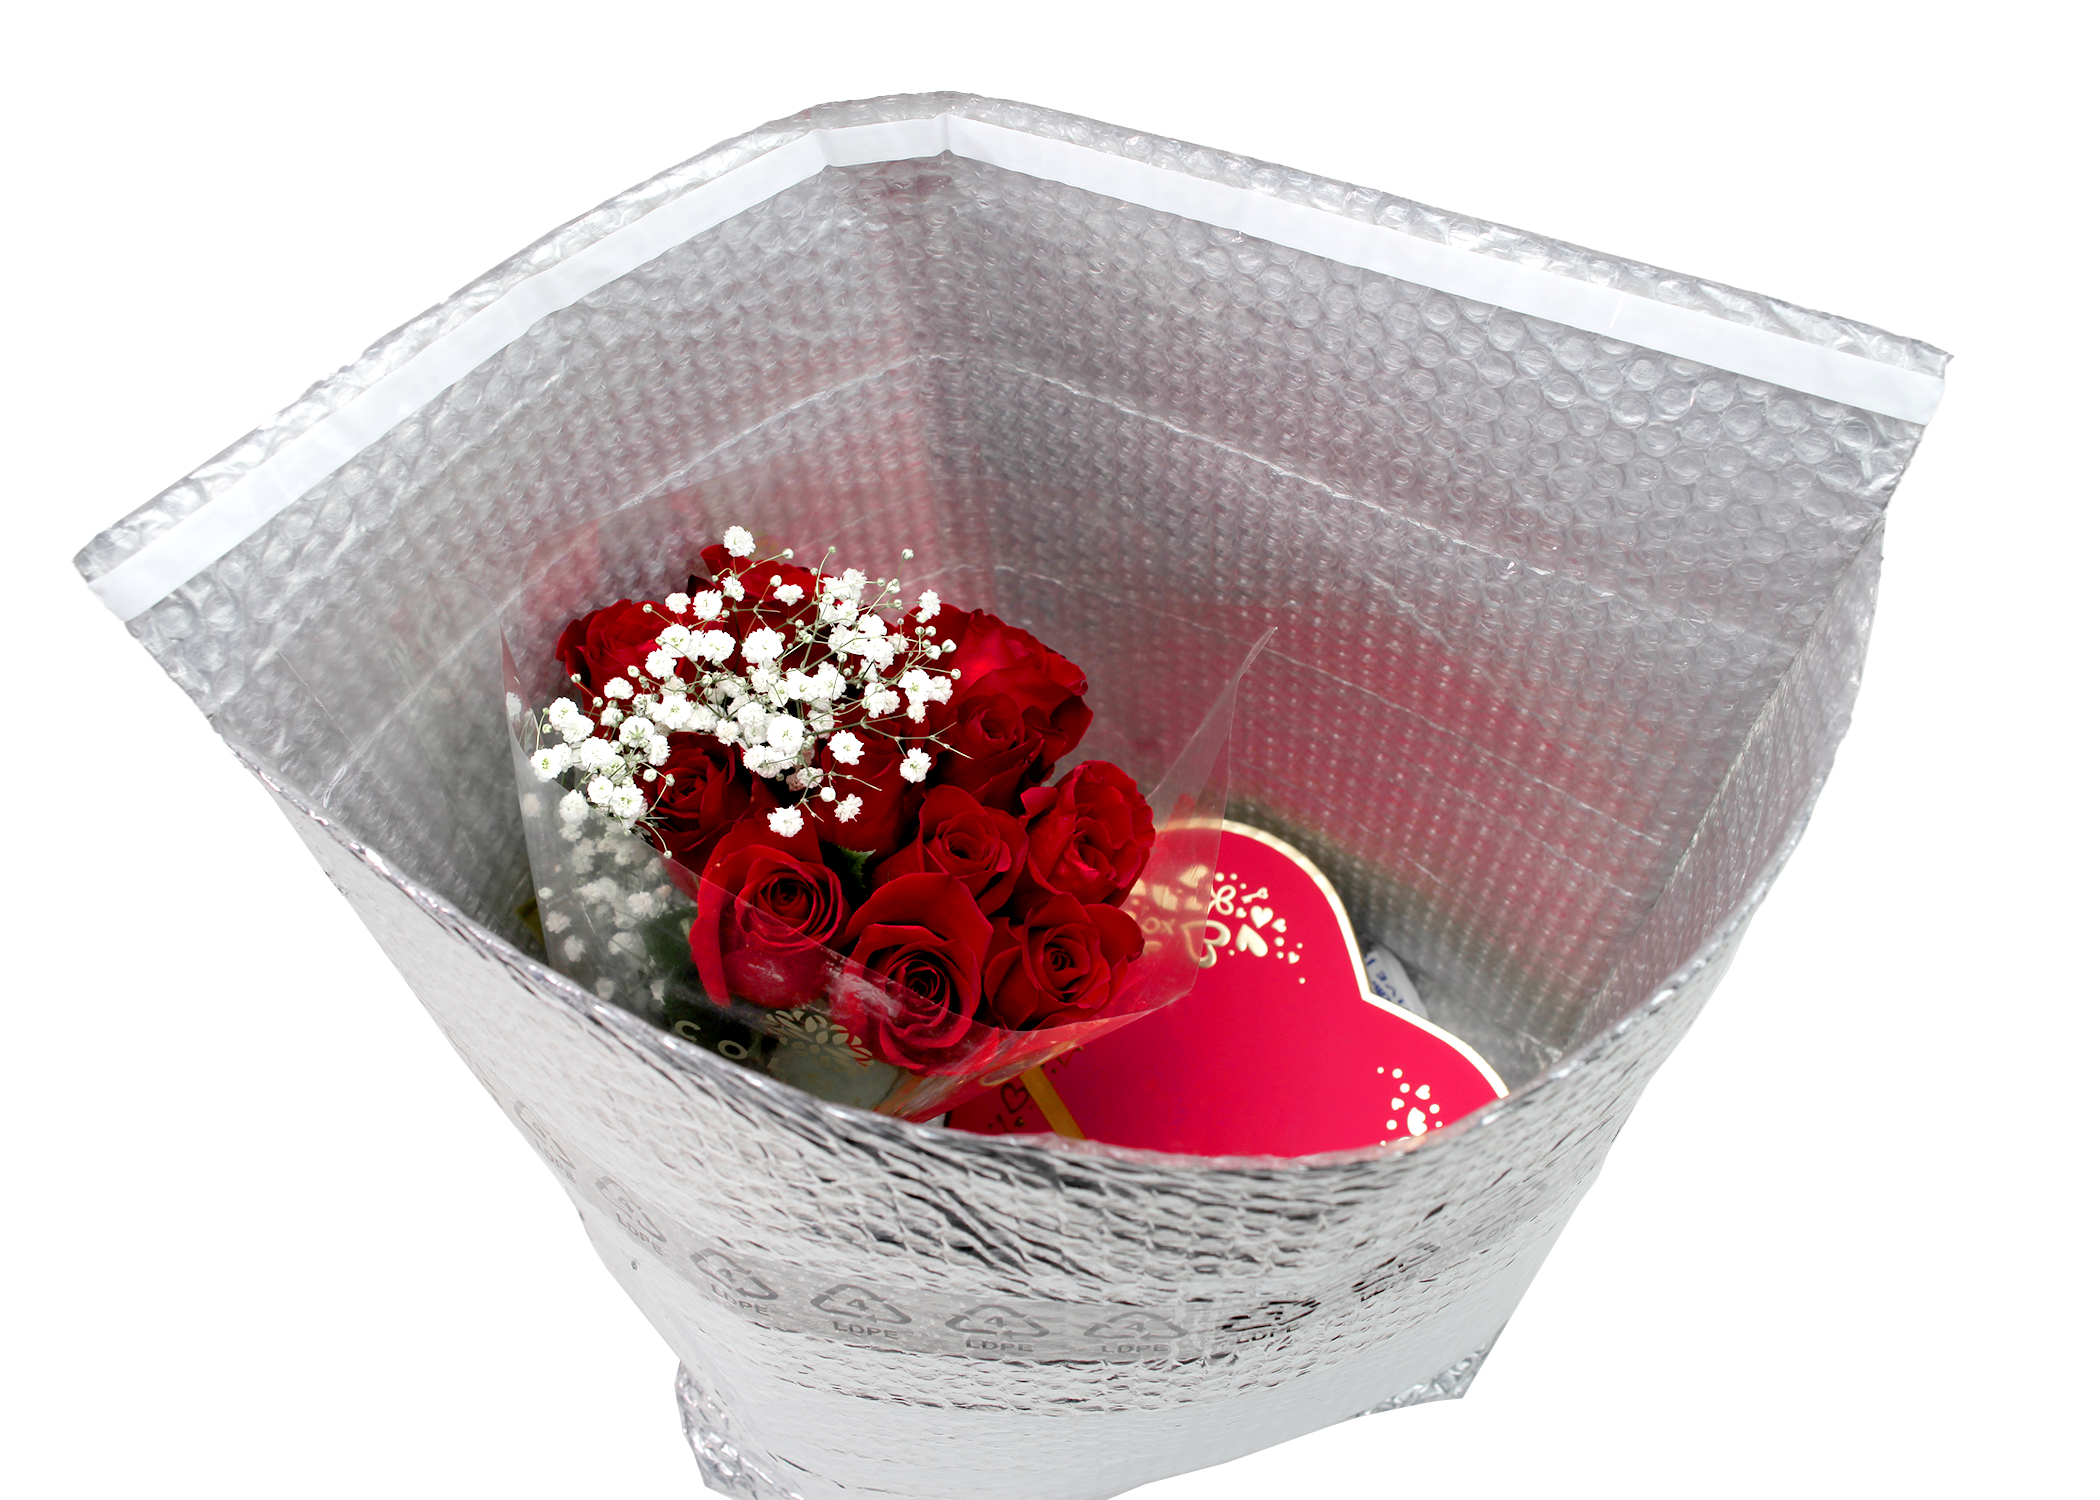 Boquet of red roses and a box of chocolates inside Pregis’ ThermaCycle Flex protective packaging